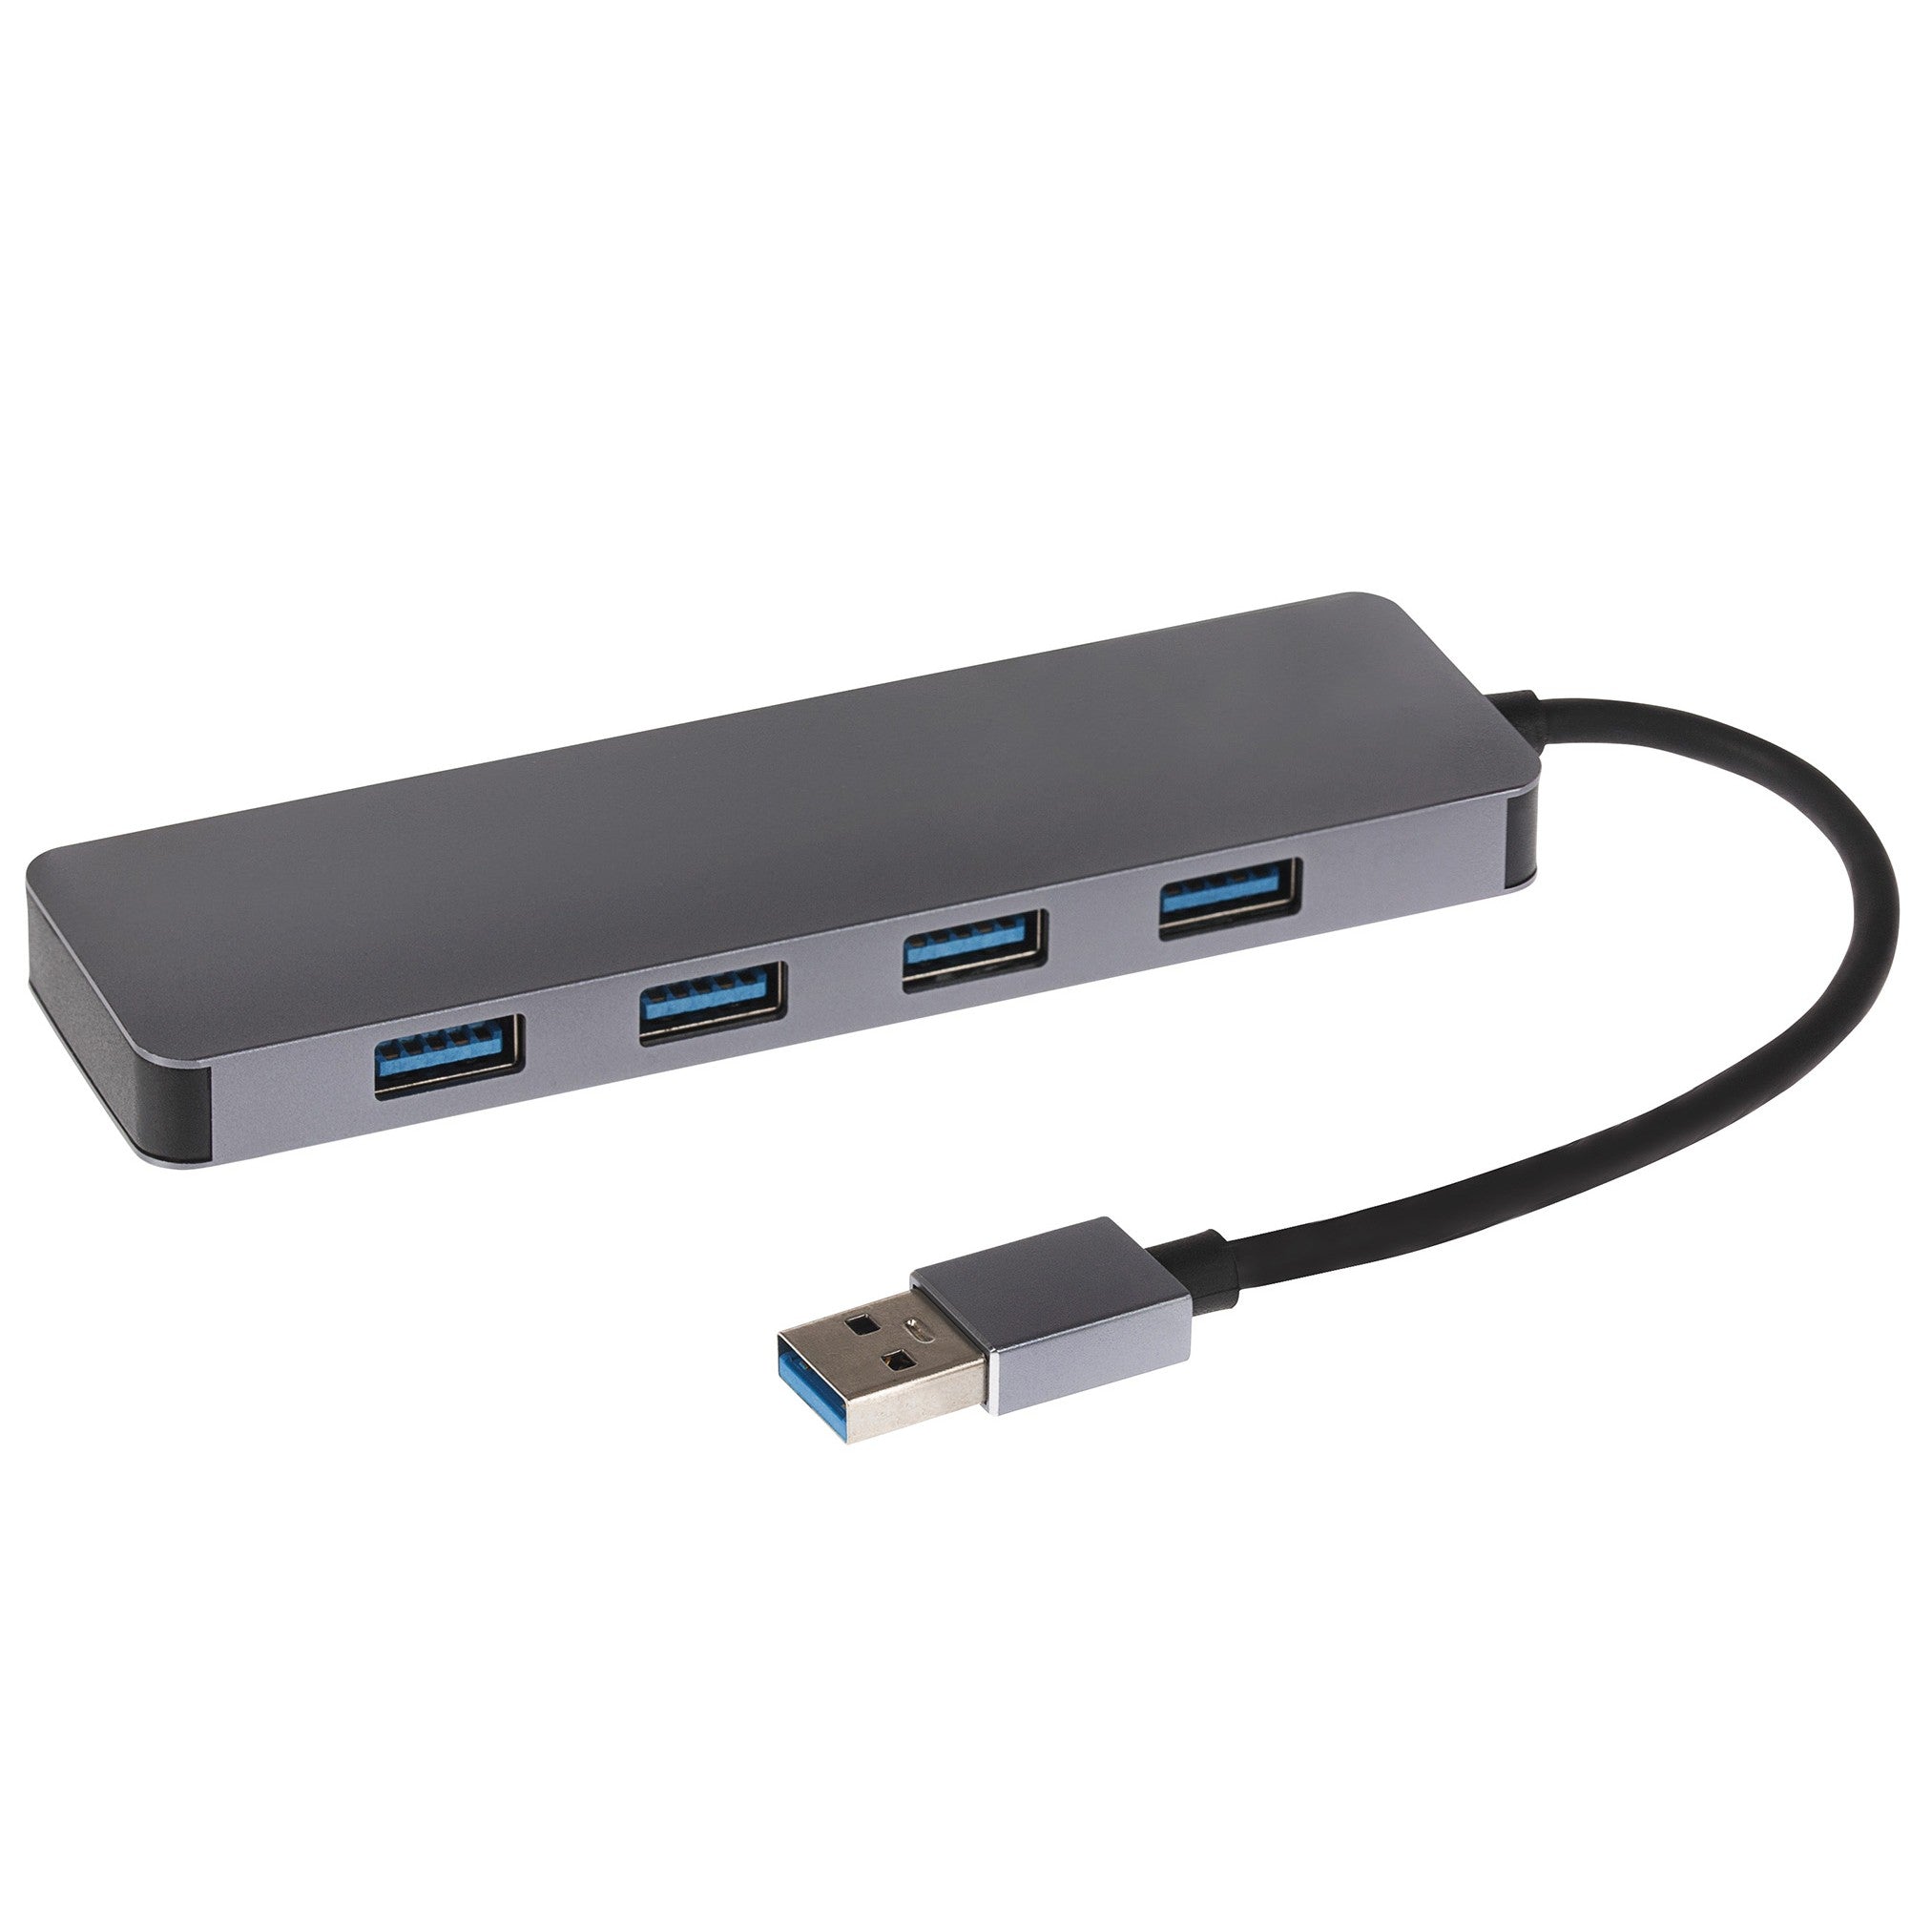 Nikkai USB-A Multiport Hub to 4x USB-A 3.0 Super Speed with 16cm Cable